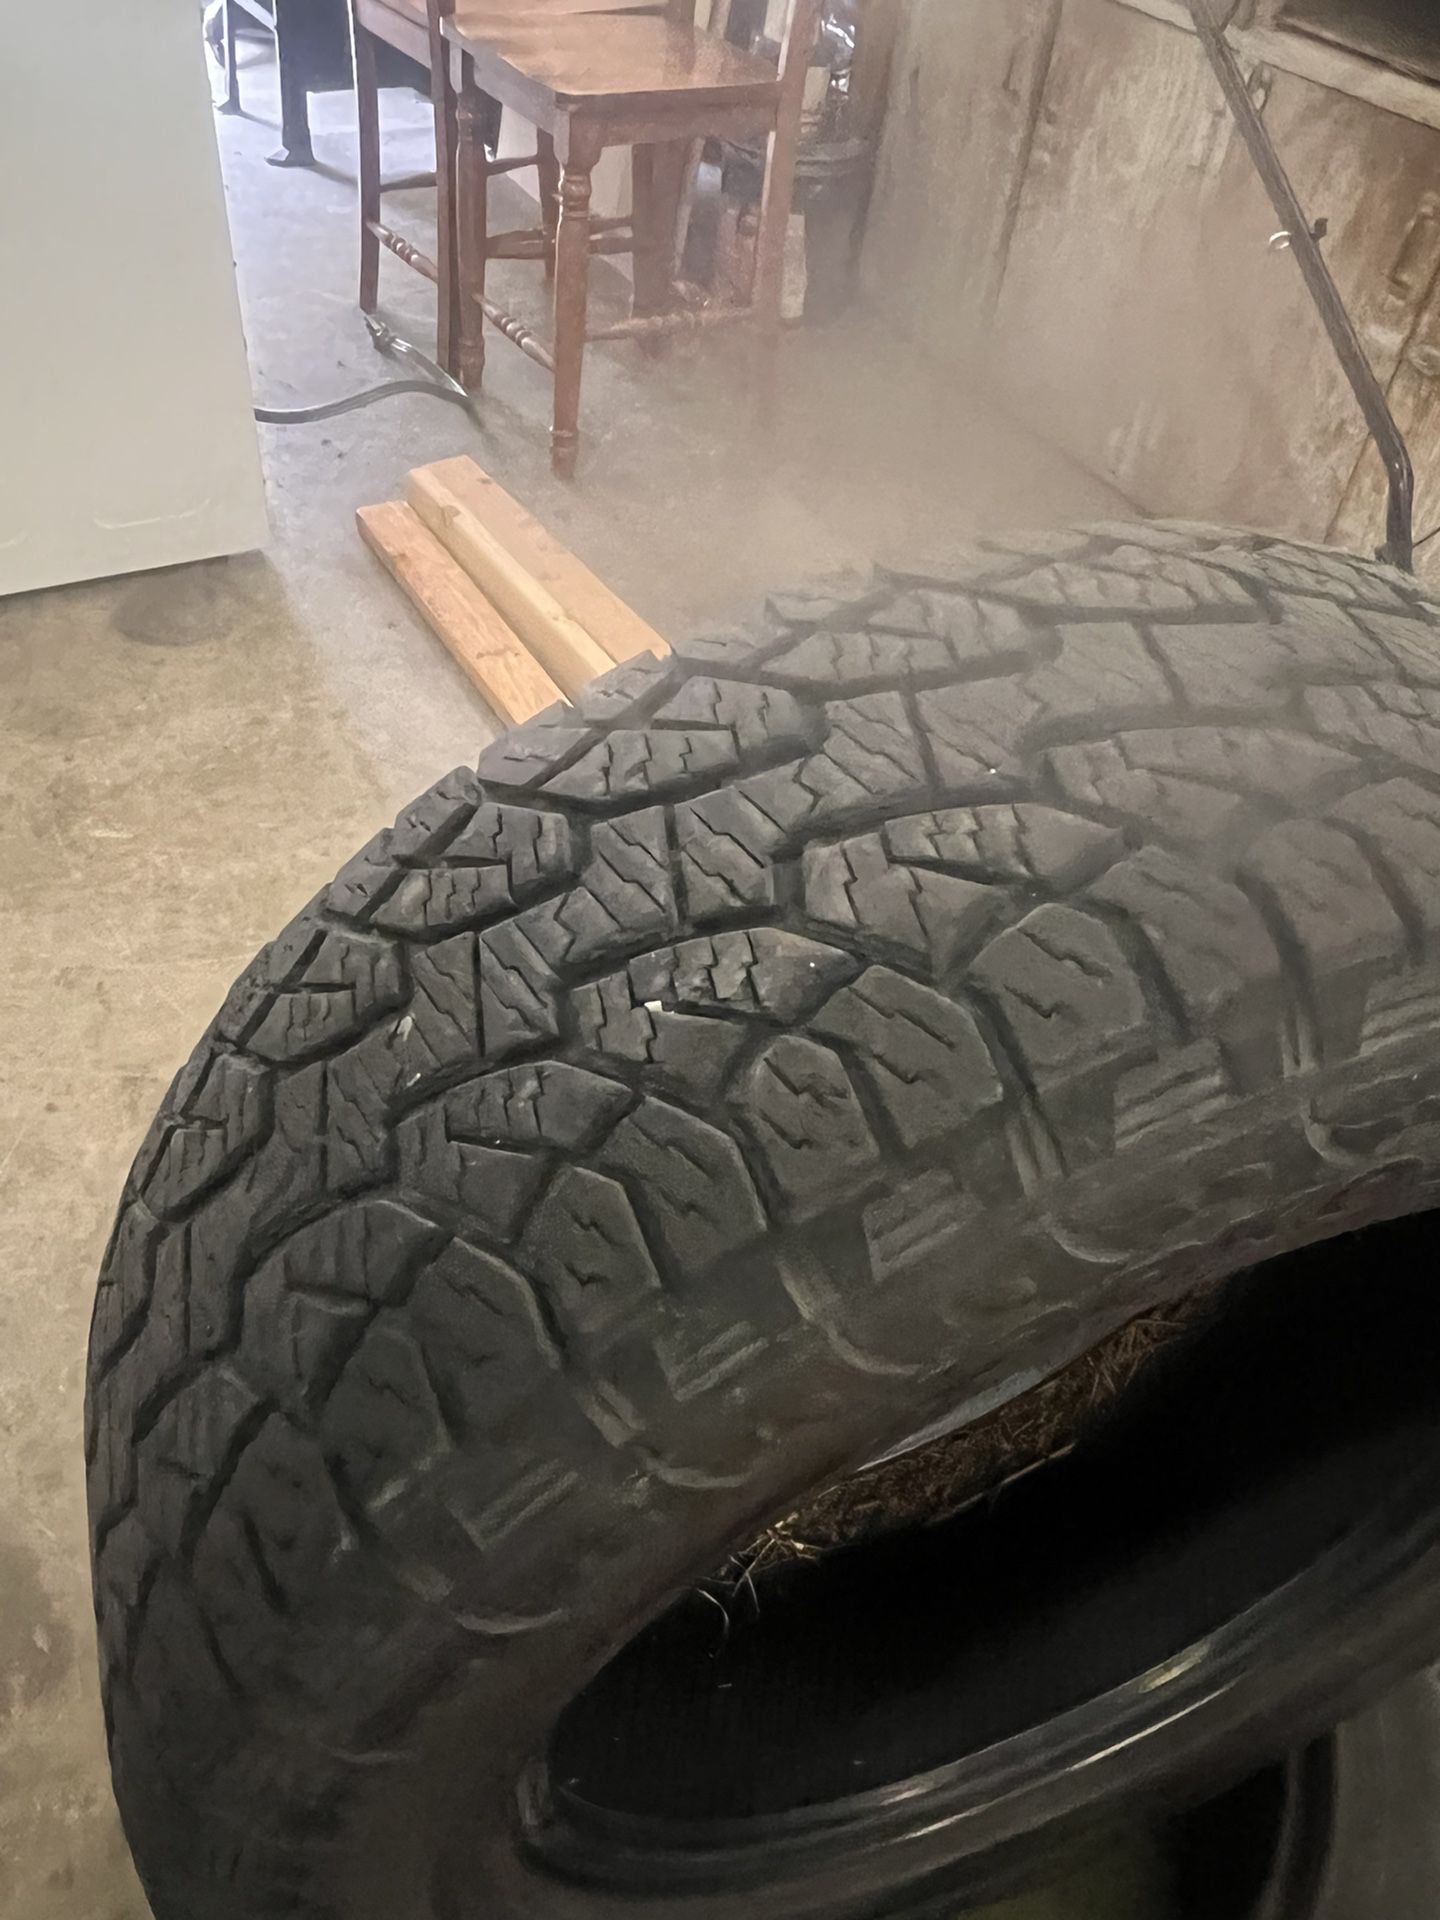 2 Name of the tire is Dynapro and The size is P275/60R20 And the tread is really excellent I will send a picture of the tread